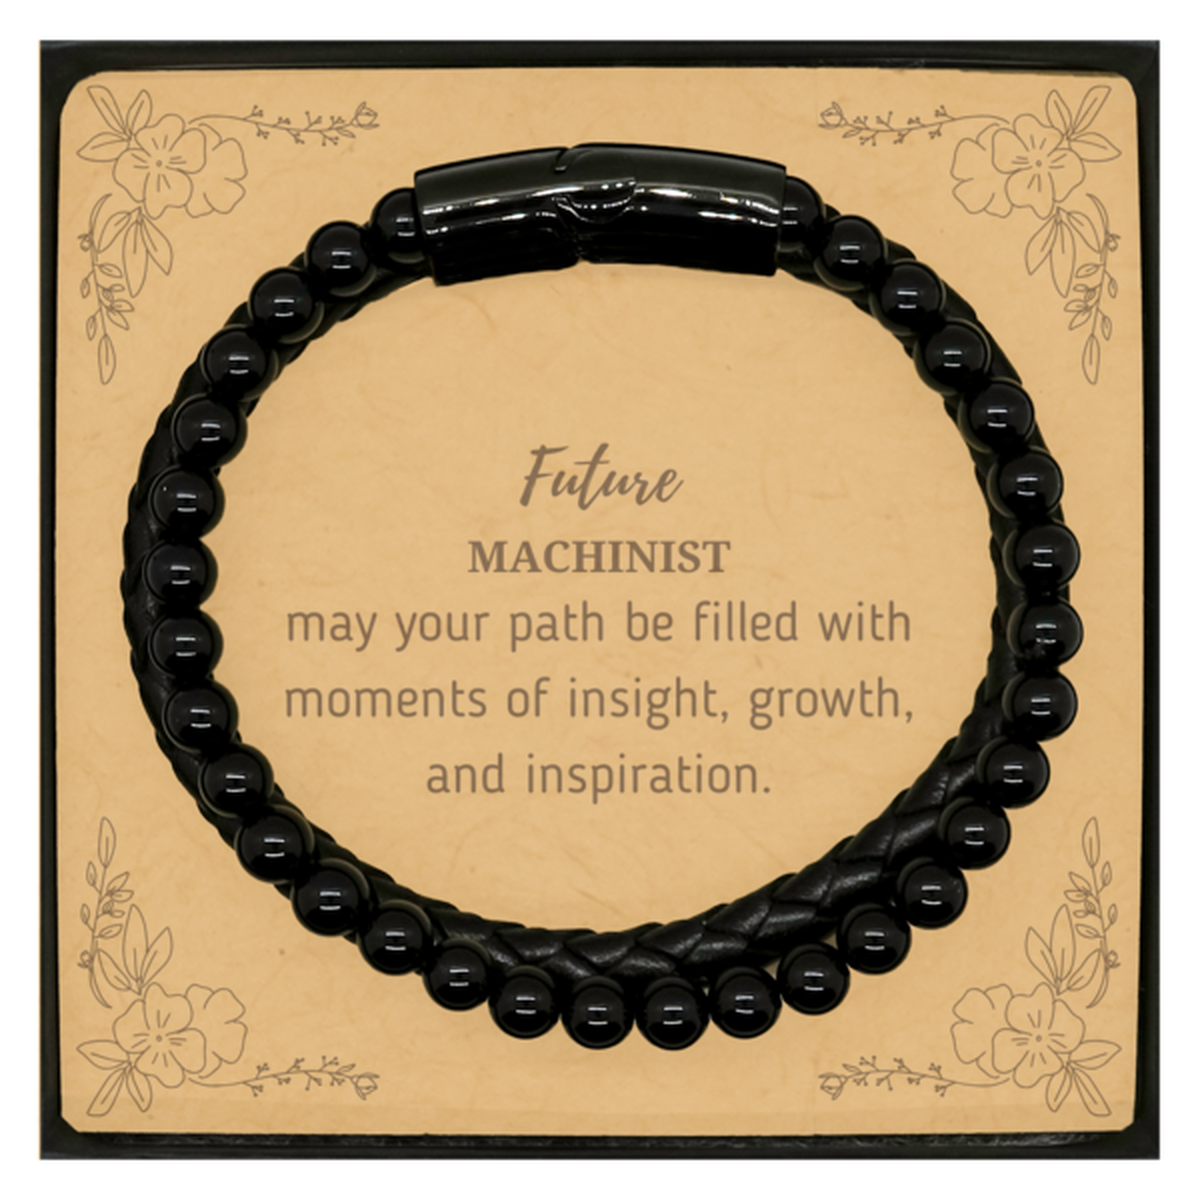 Future Machinist Gifts, May your path be filled with moments of insight, Graduation Gifts for New Machinist, Christmas Unique Stone Leather Bracelets For Men, Women, Friends